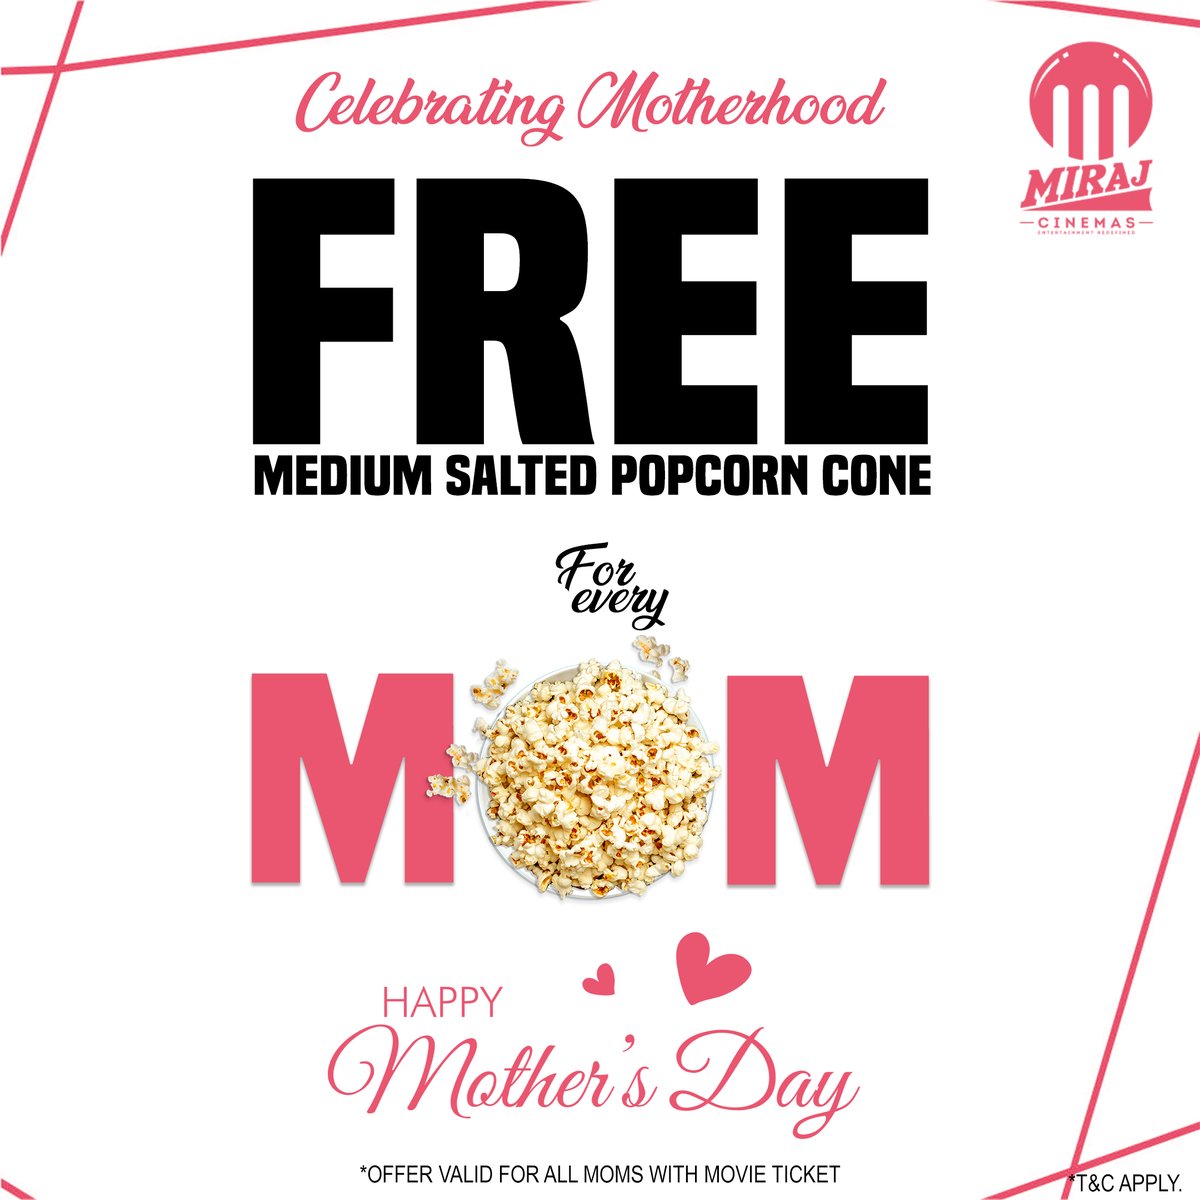 Calling all moms, this one's for you! This Mother's Day, Miraj Cinemas puts you in the spotlight with a blockbuster offer: Receive a complimentary medium popcorn cone on us as a token of appreciation. 🍿💐 #MirajCinemas wishes you a joyous Mother's Day! #HappyMothersDay #Offer…